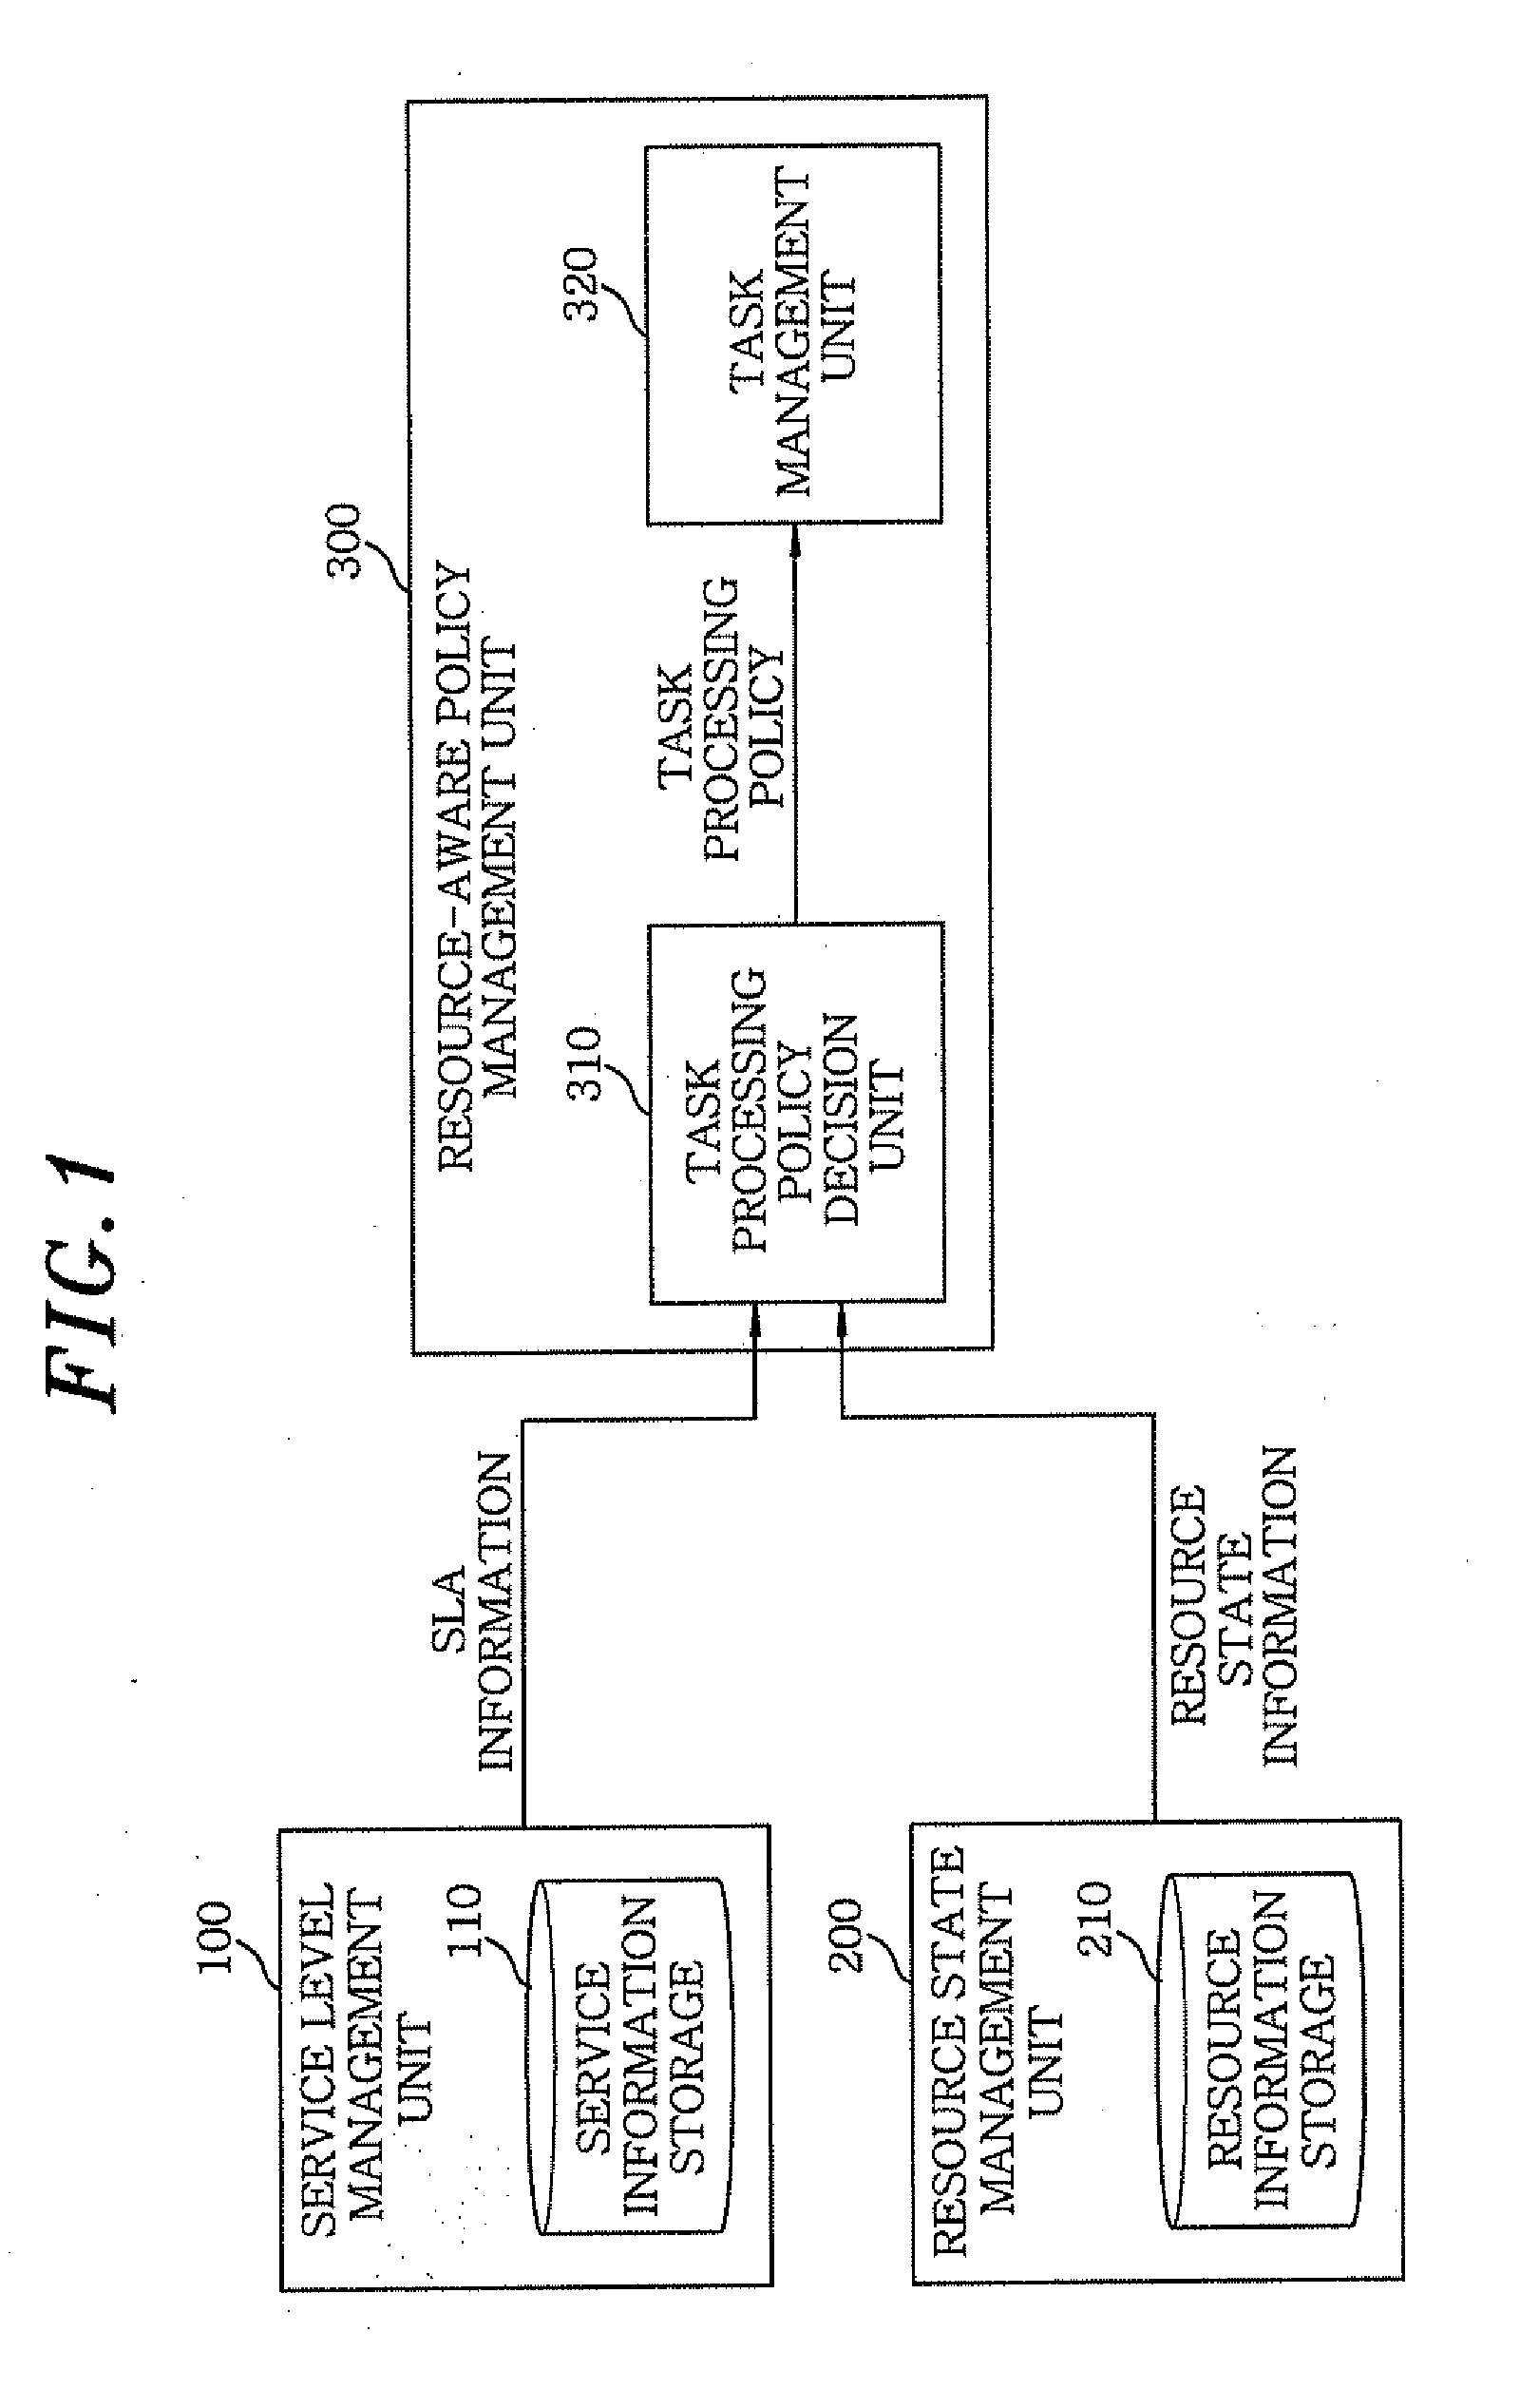 Method and apparatus for resource management in grid computing systems